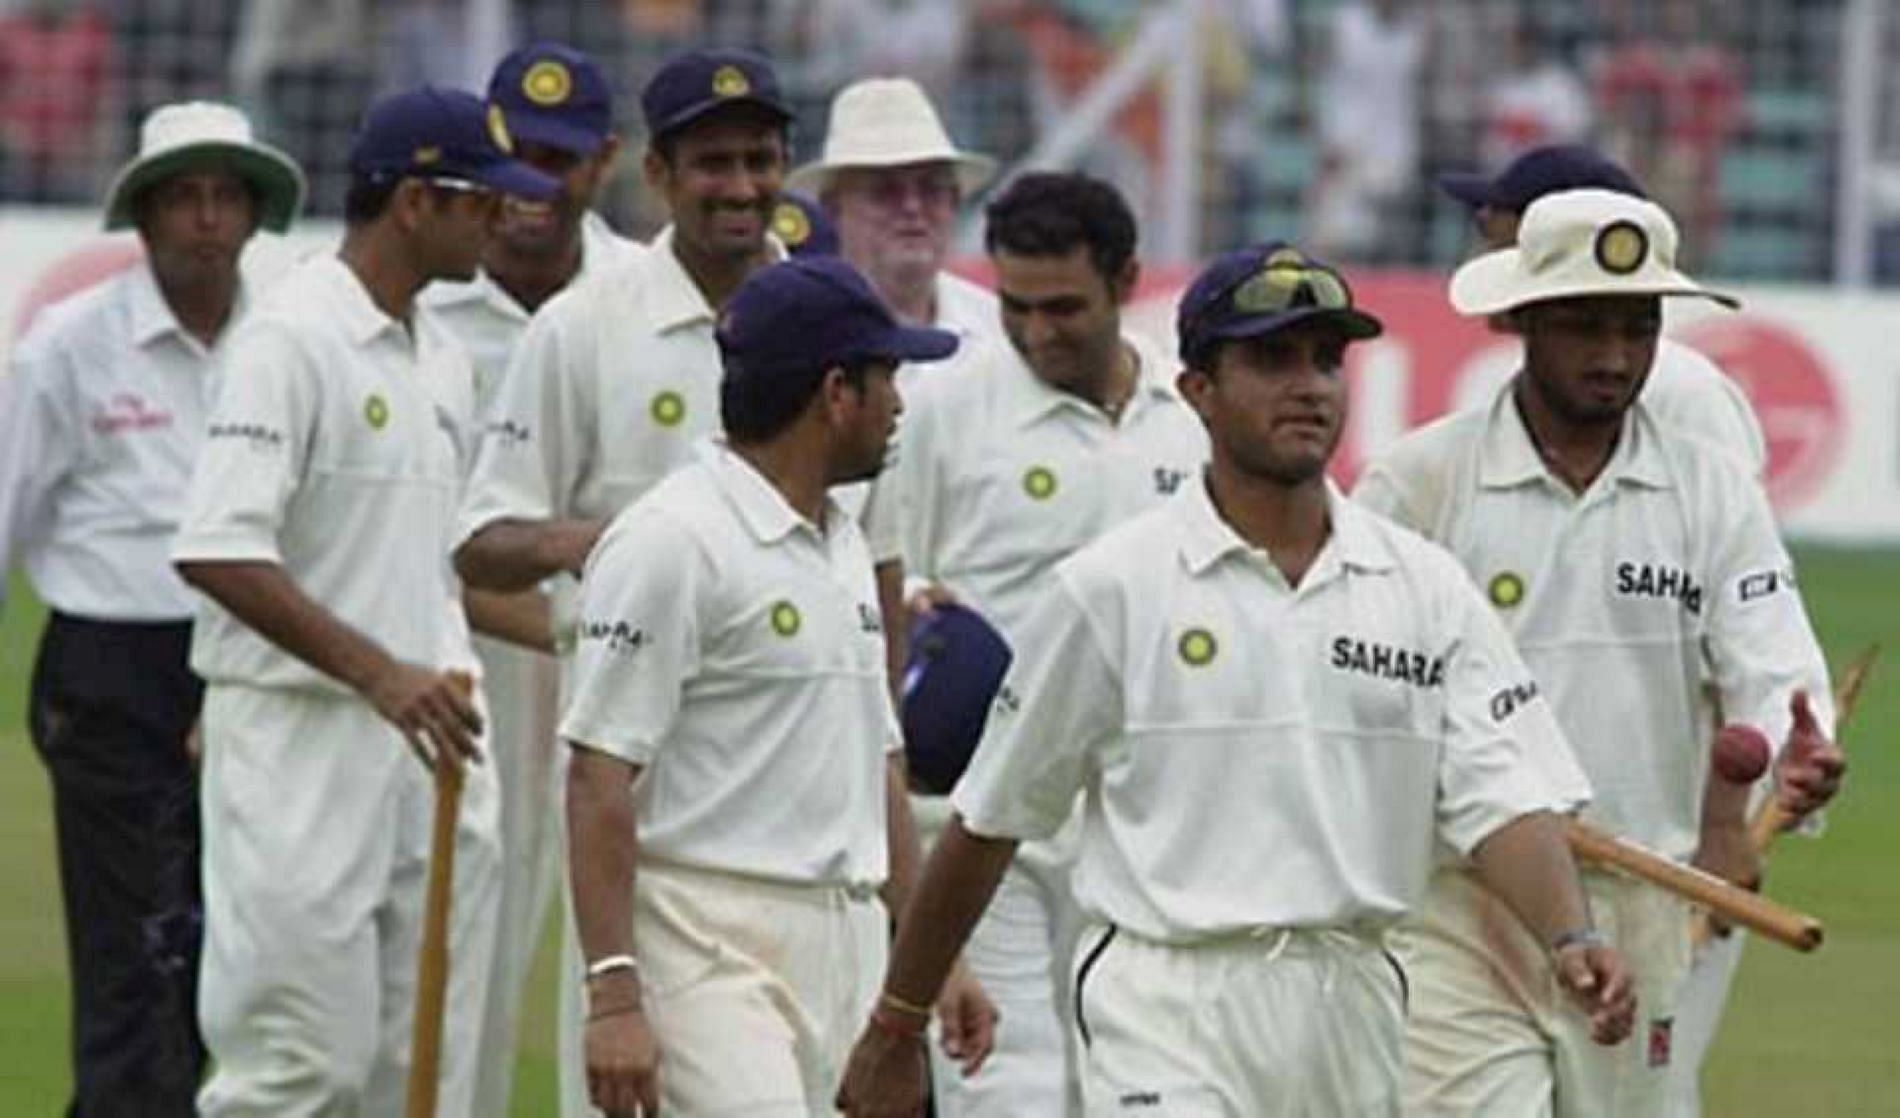 India last suffered a series defeat against the West Indies in Tests in 2002